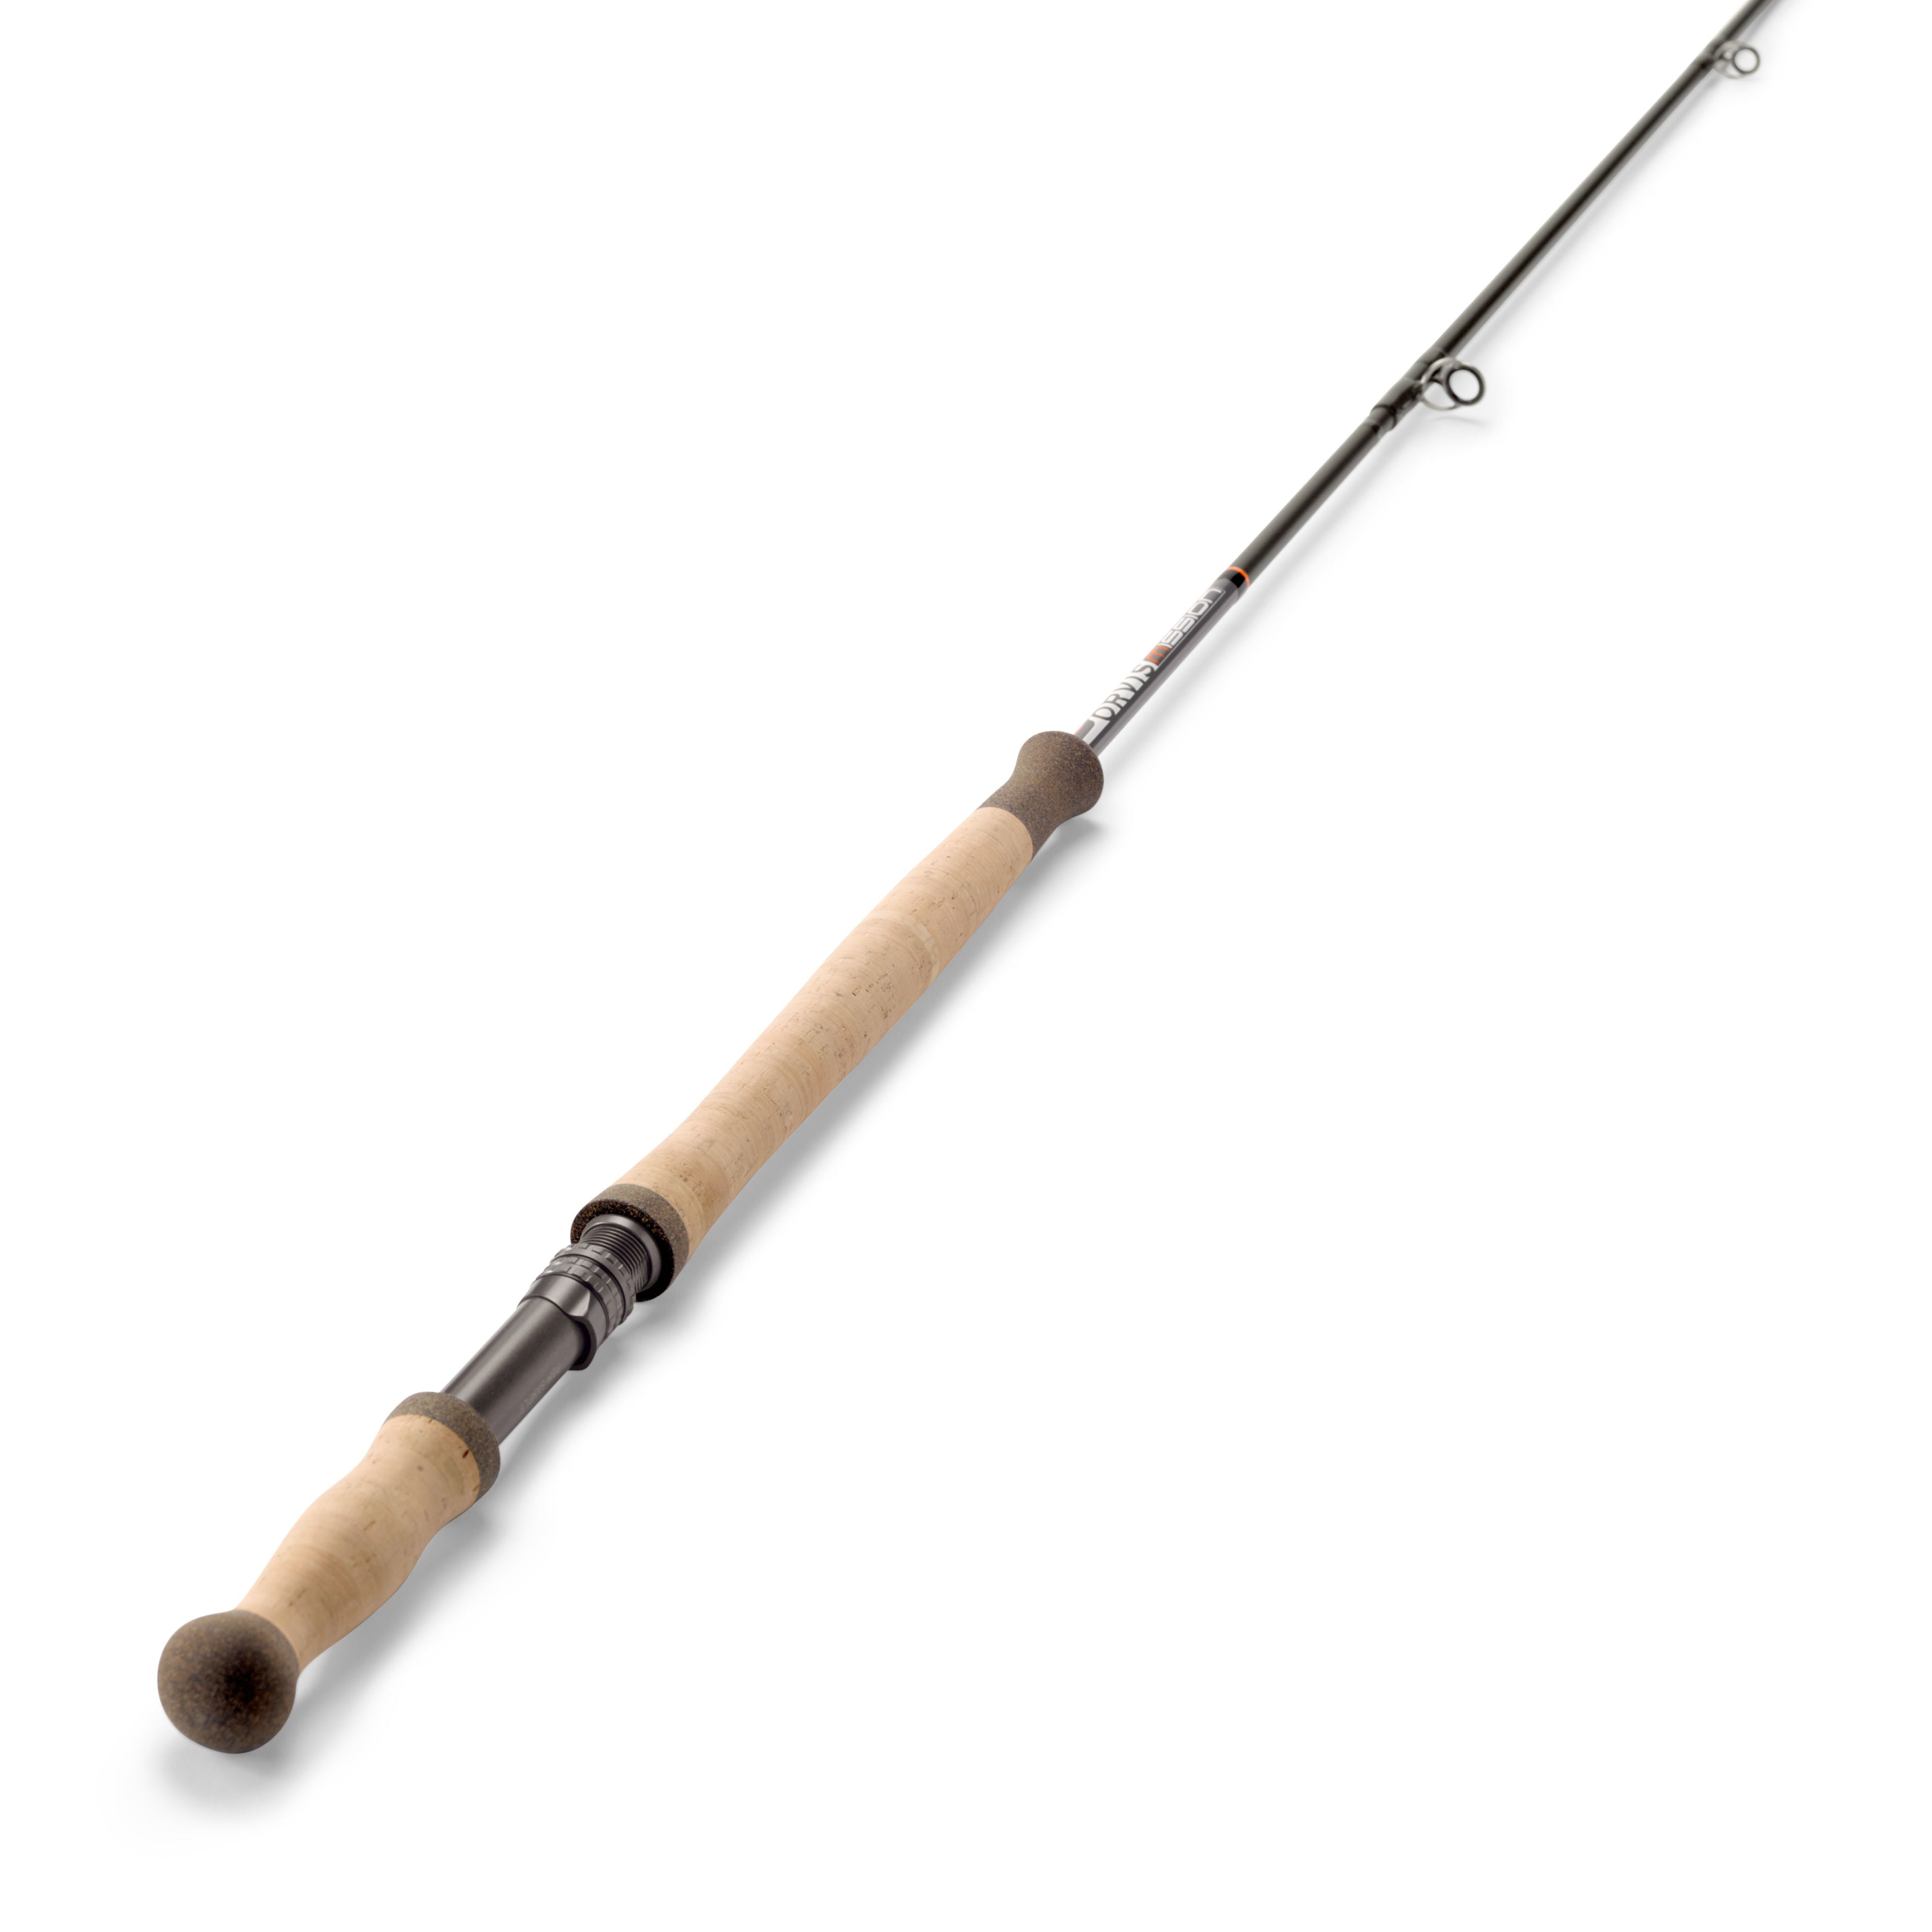 Mission Two-Handed 11' 8-Weight Fly Rod, Fly Fishing Rods